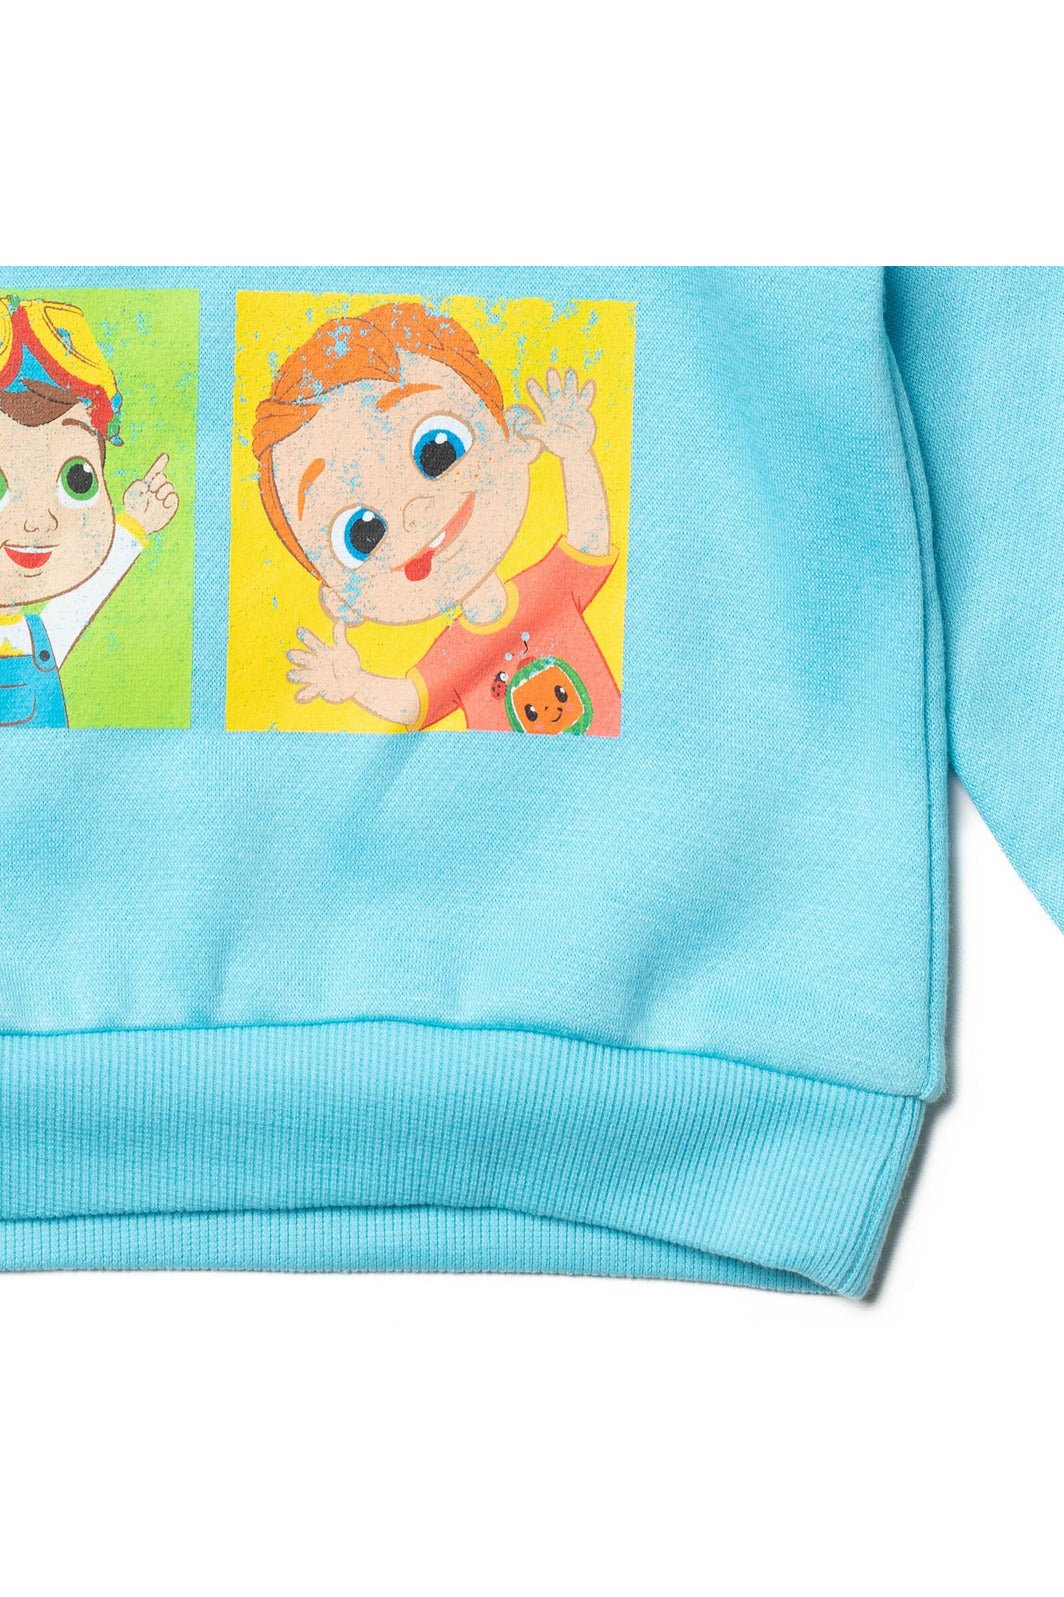 CoComelon Pullover Hoodie - imagikids